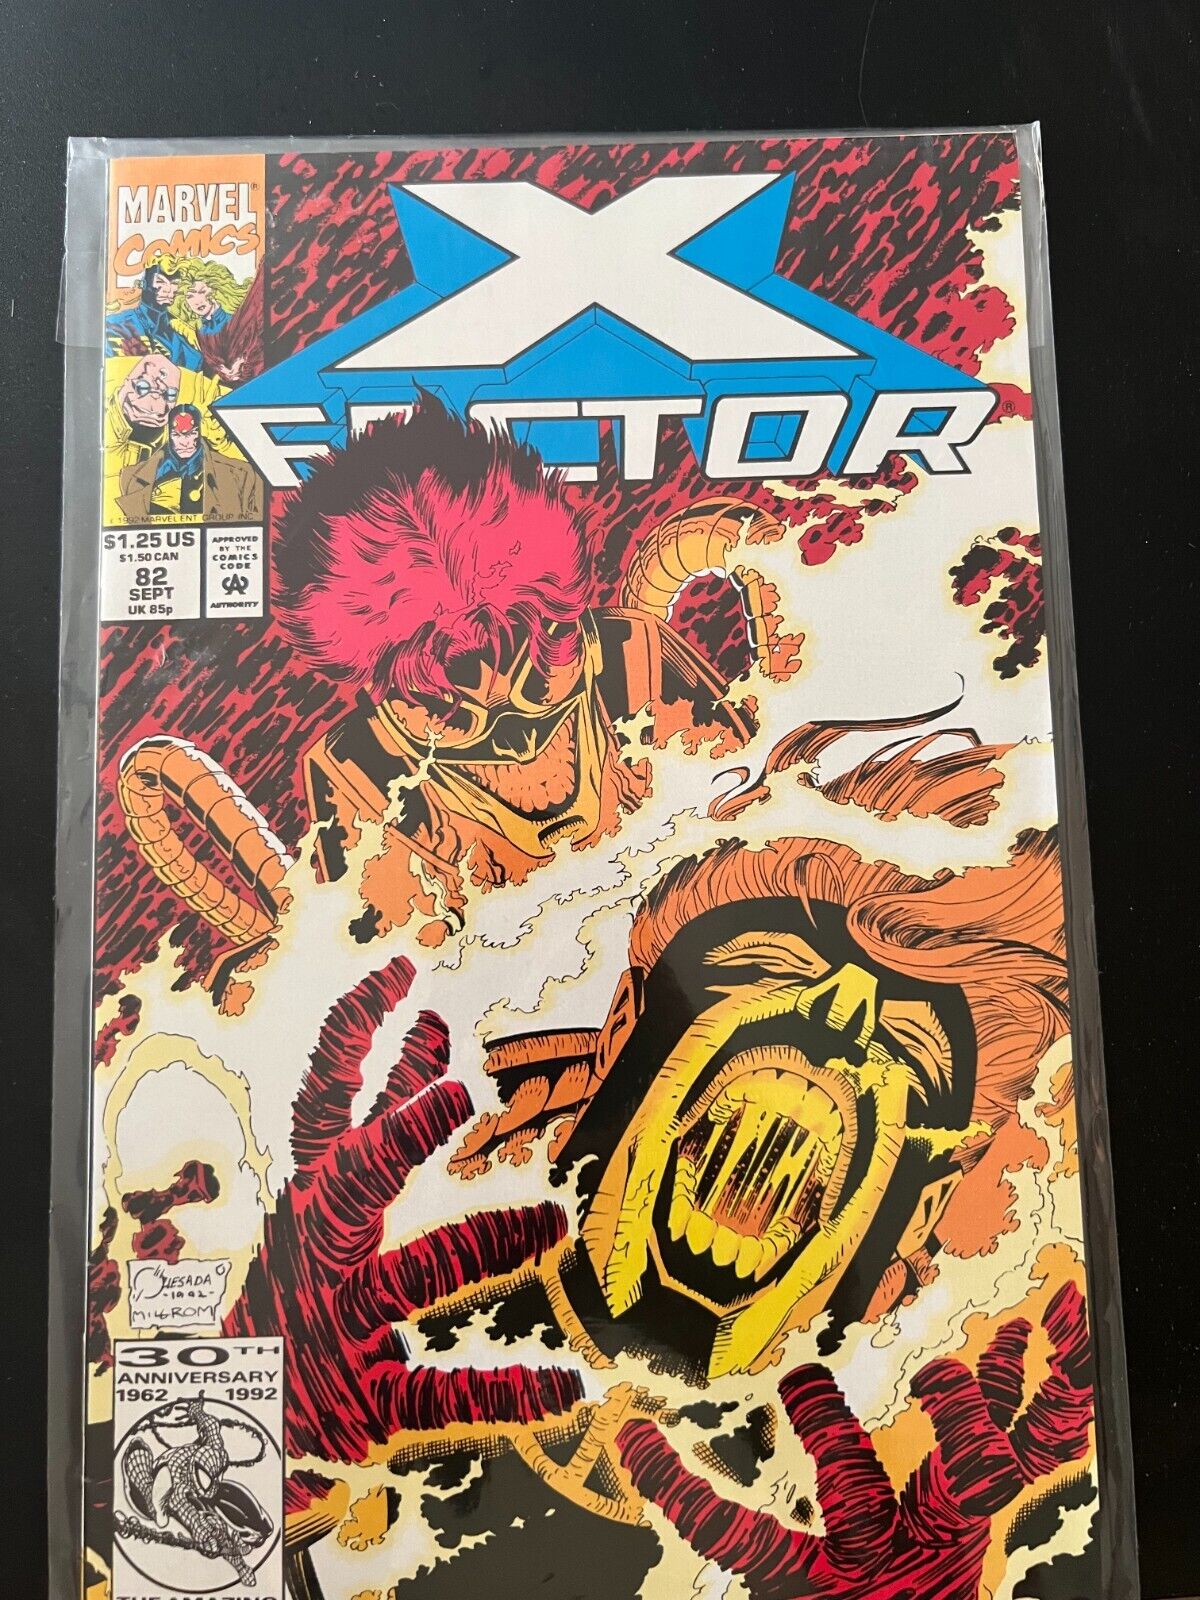 Lot of 3 Marvel Comics X-Factor #82, #85, #86-X-Cutioner's Song Story Arc